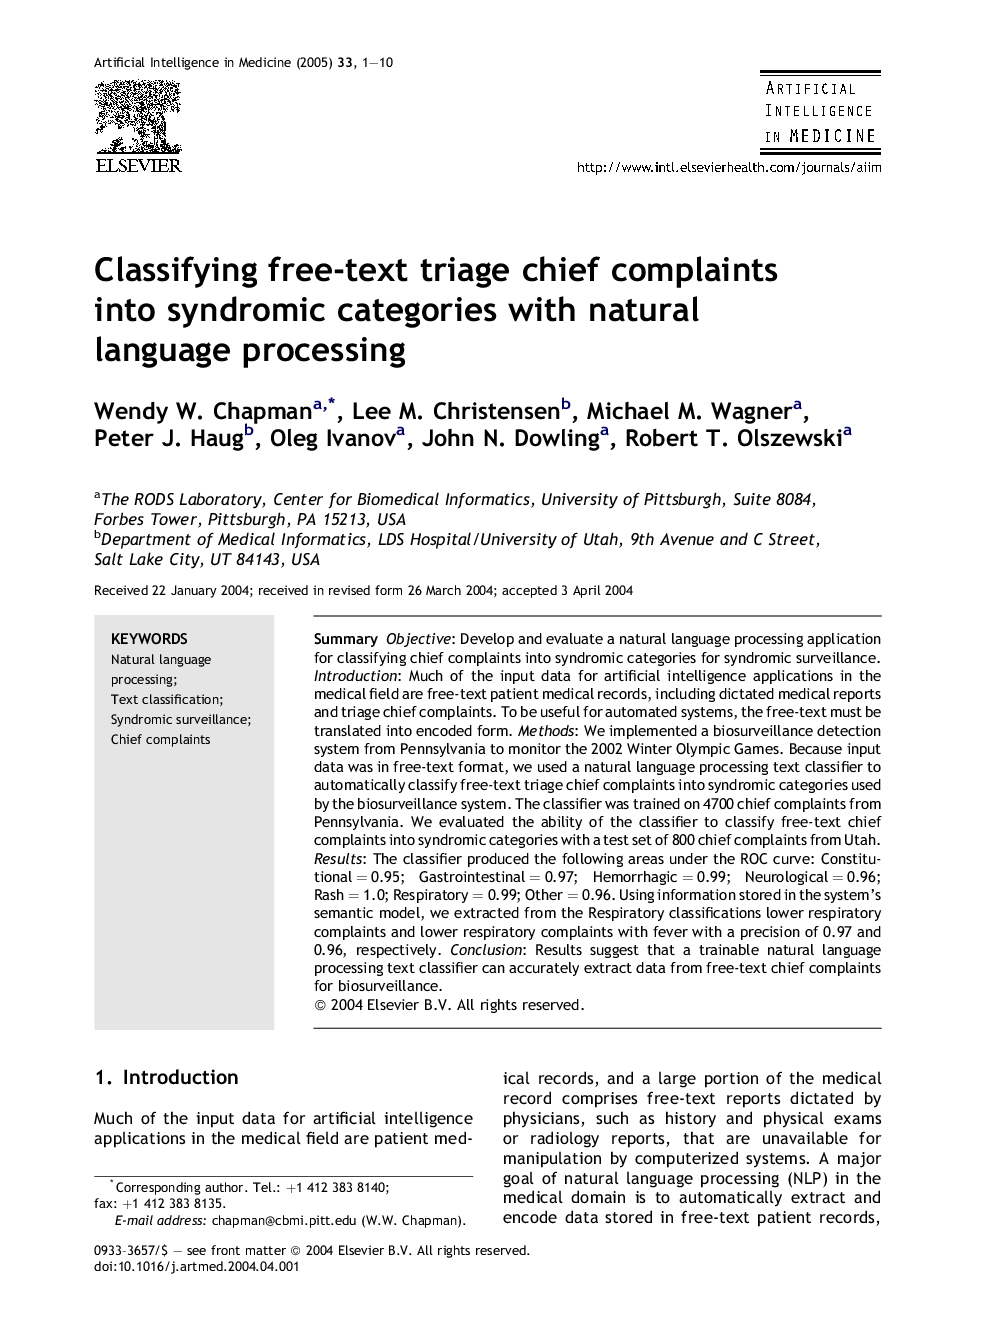 Classifying free-text triage chief complaints into syndromic categories with natural language processing